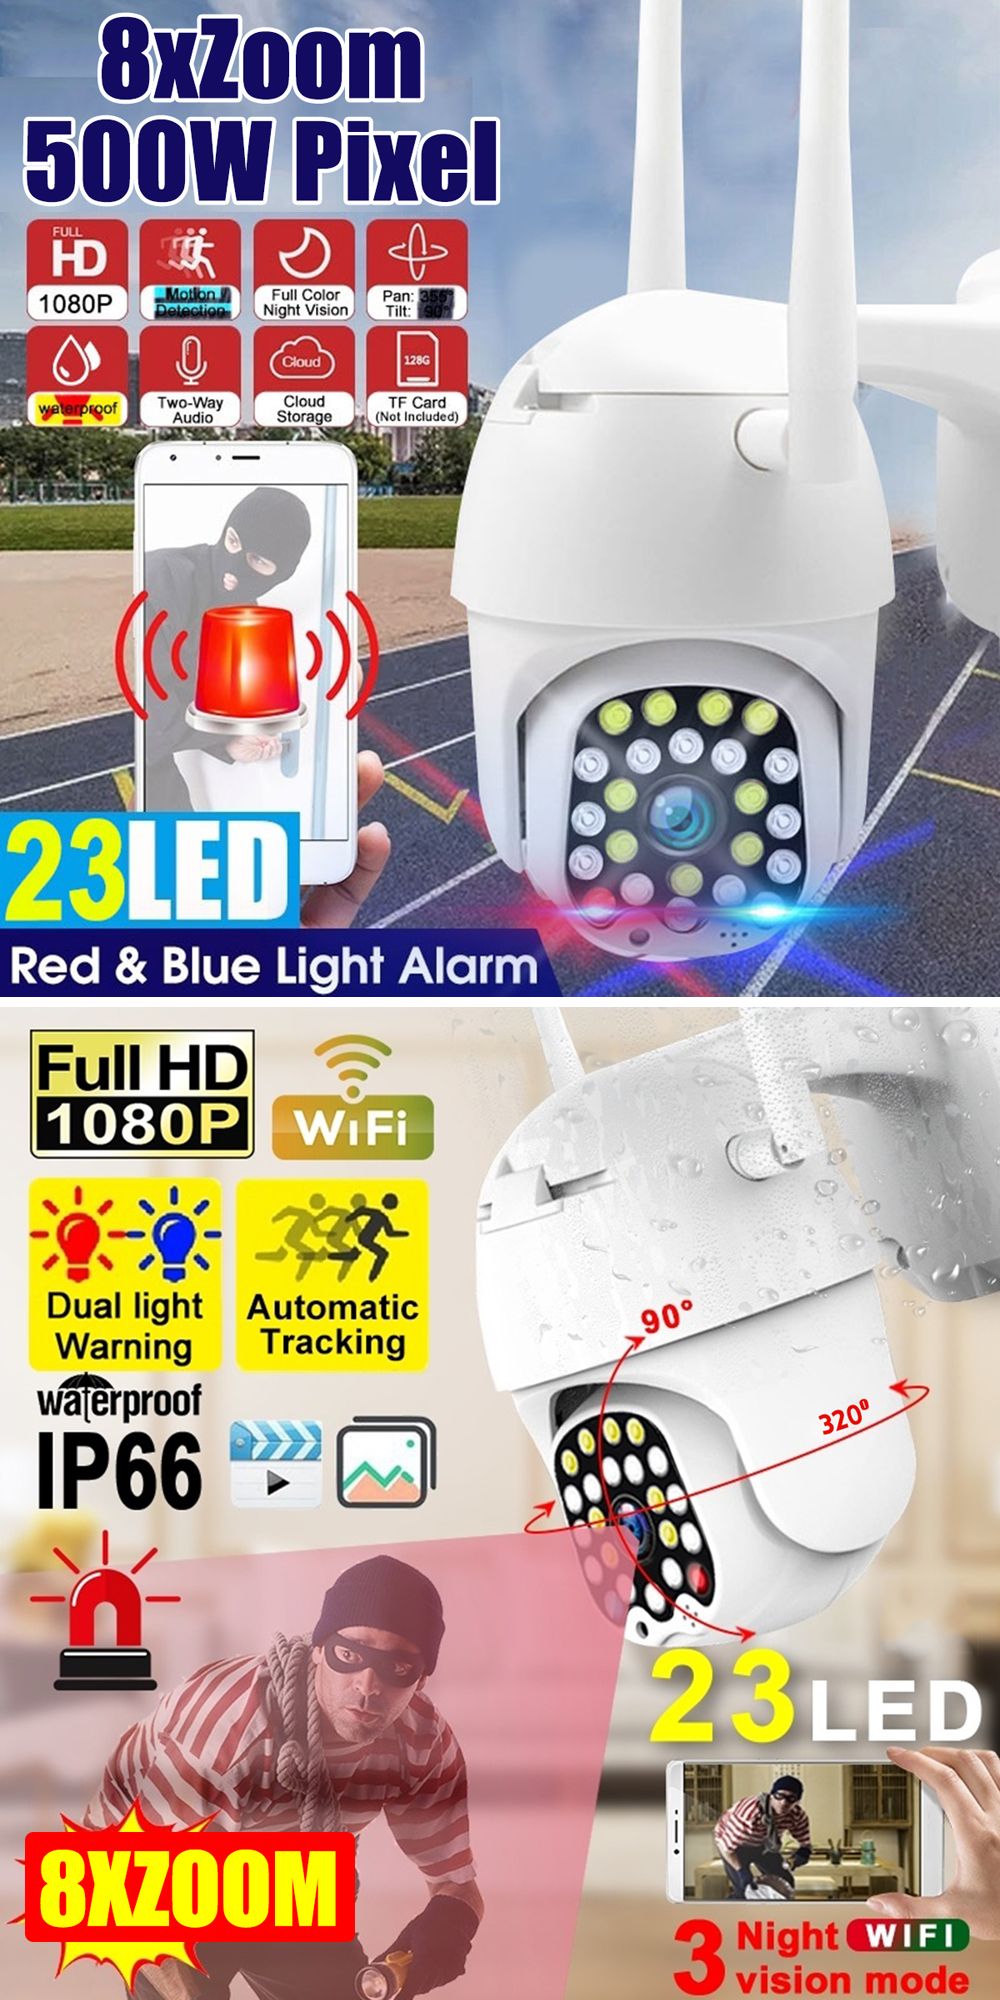 GUUDGO-4X-Zoom-23LED-1080P-HD-Wifi-IP-Security-Camera-Outdoor-Light--Sound-Alarm-Night-Vision-Waterp-1564870